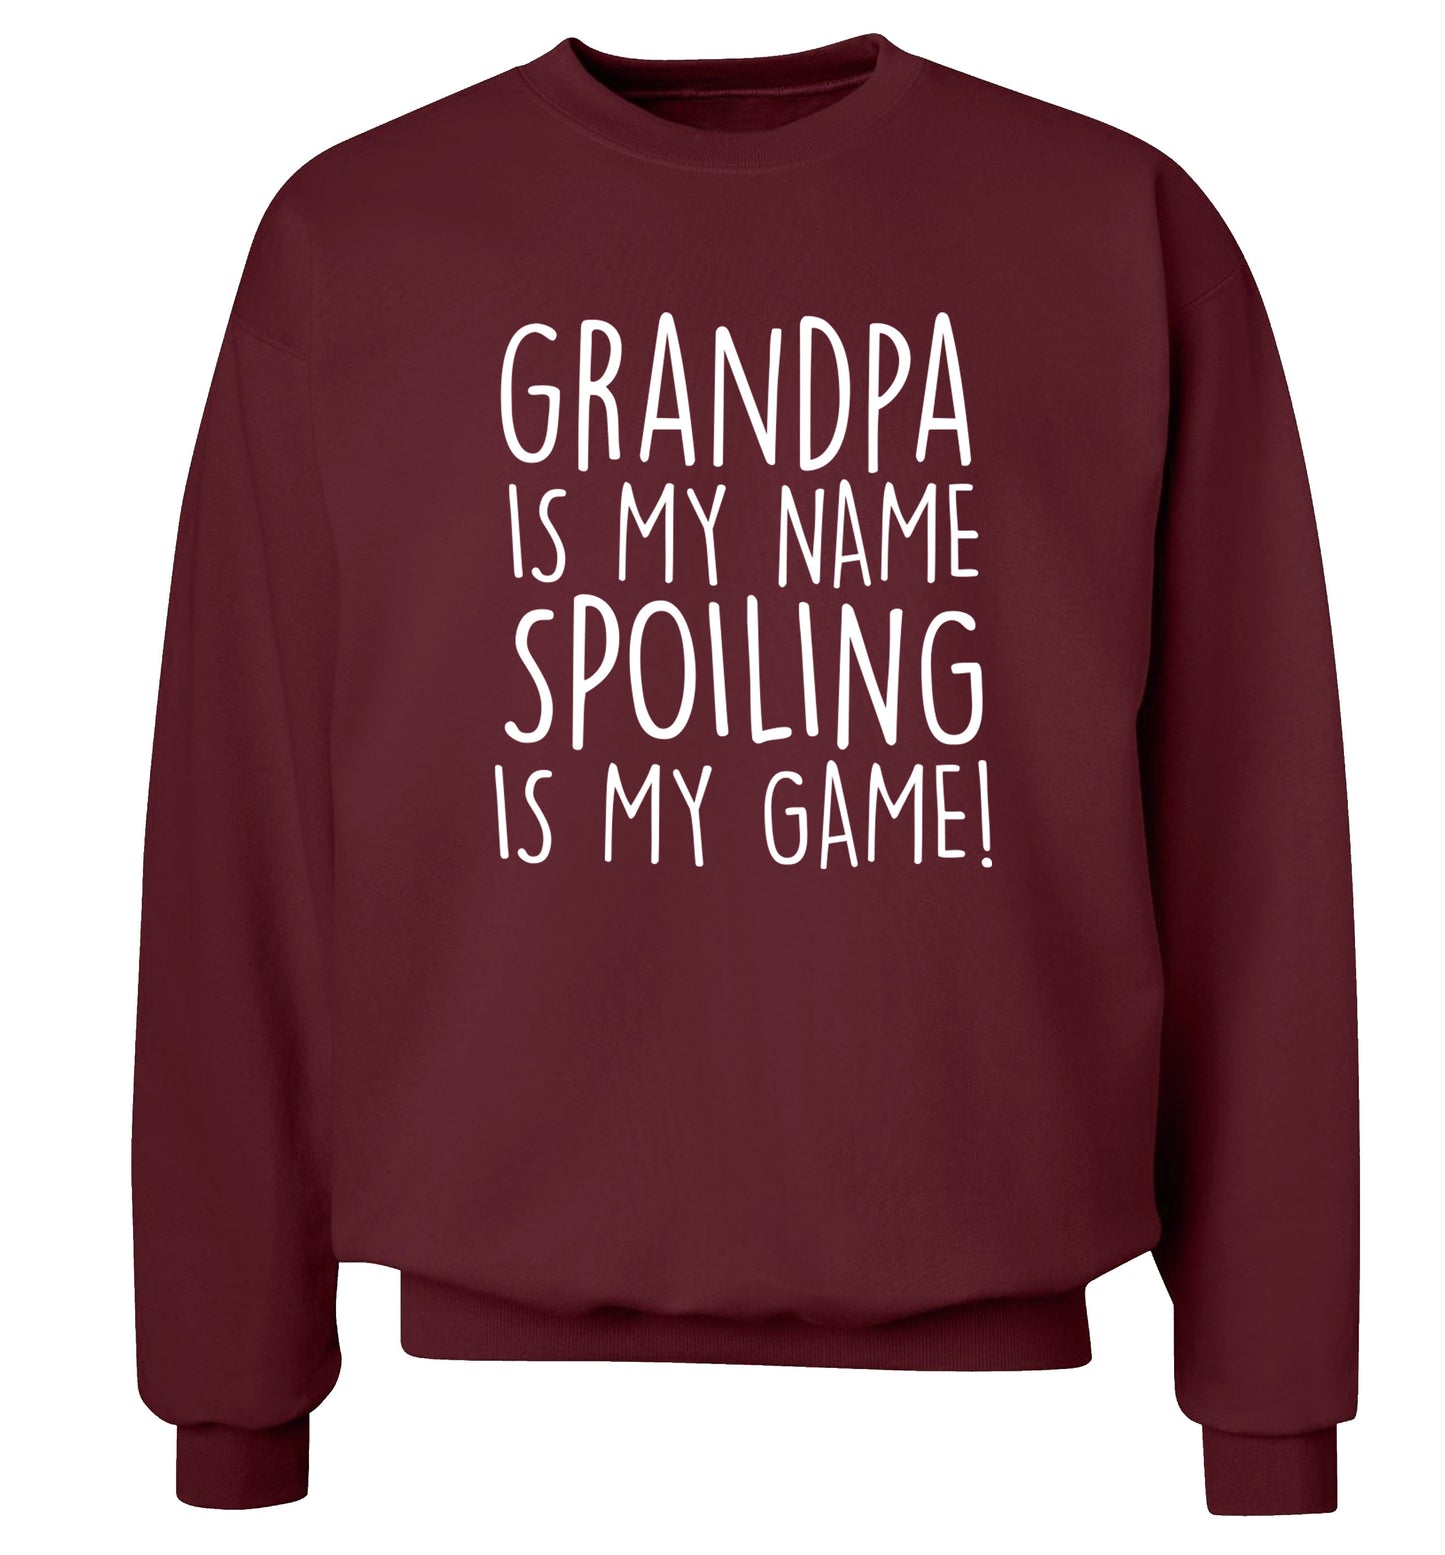 Grandpa is my name, spoiling is my game Adult's unisex maroon Sweater 2XL